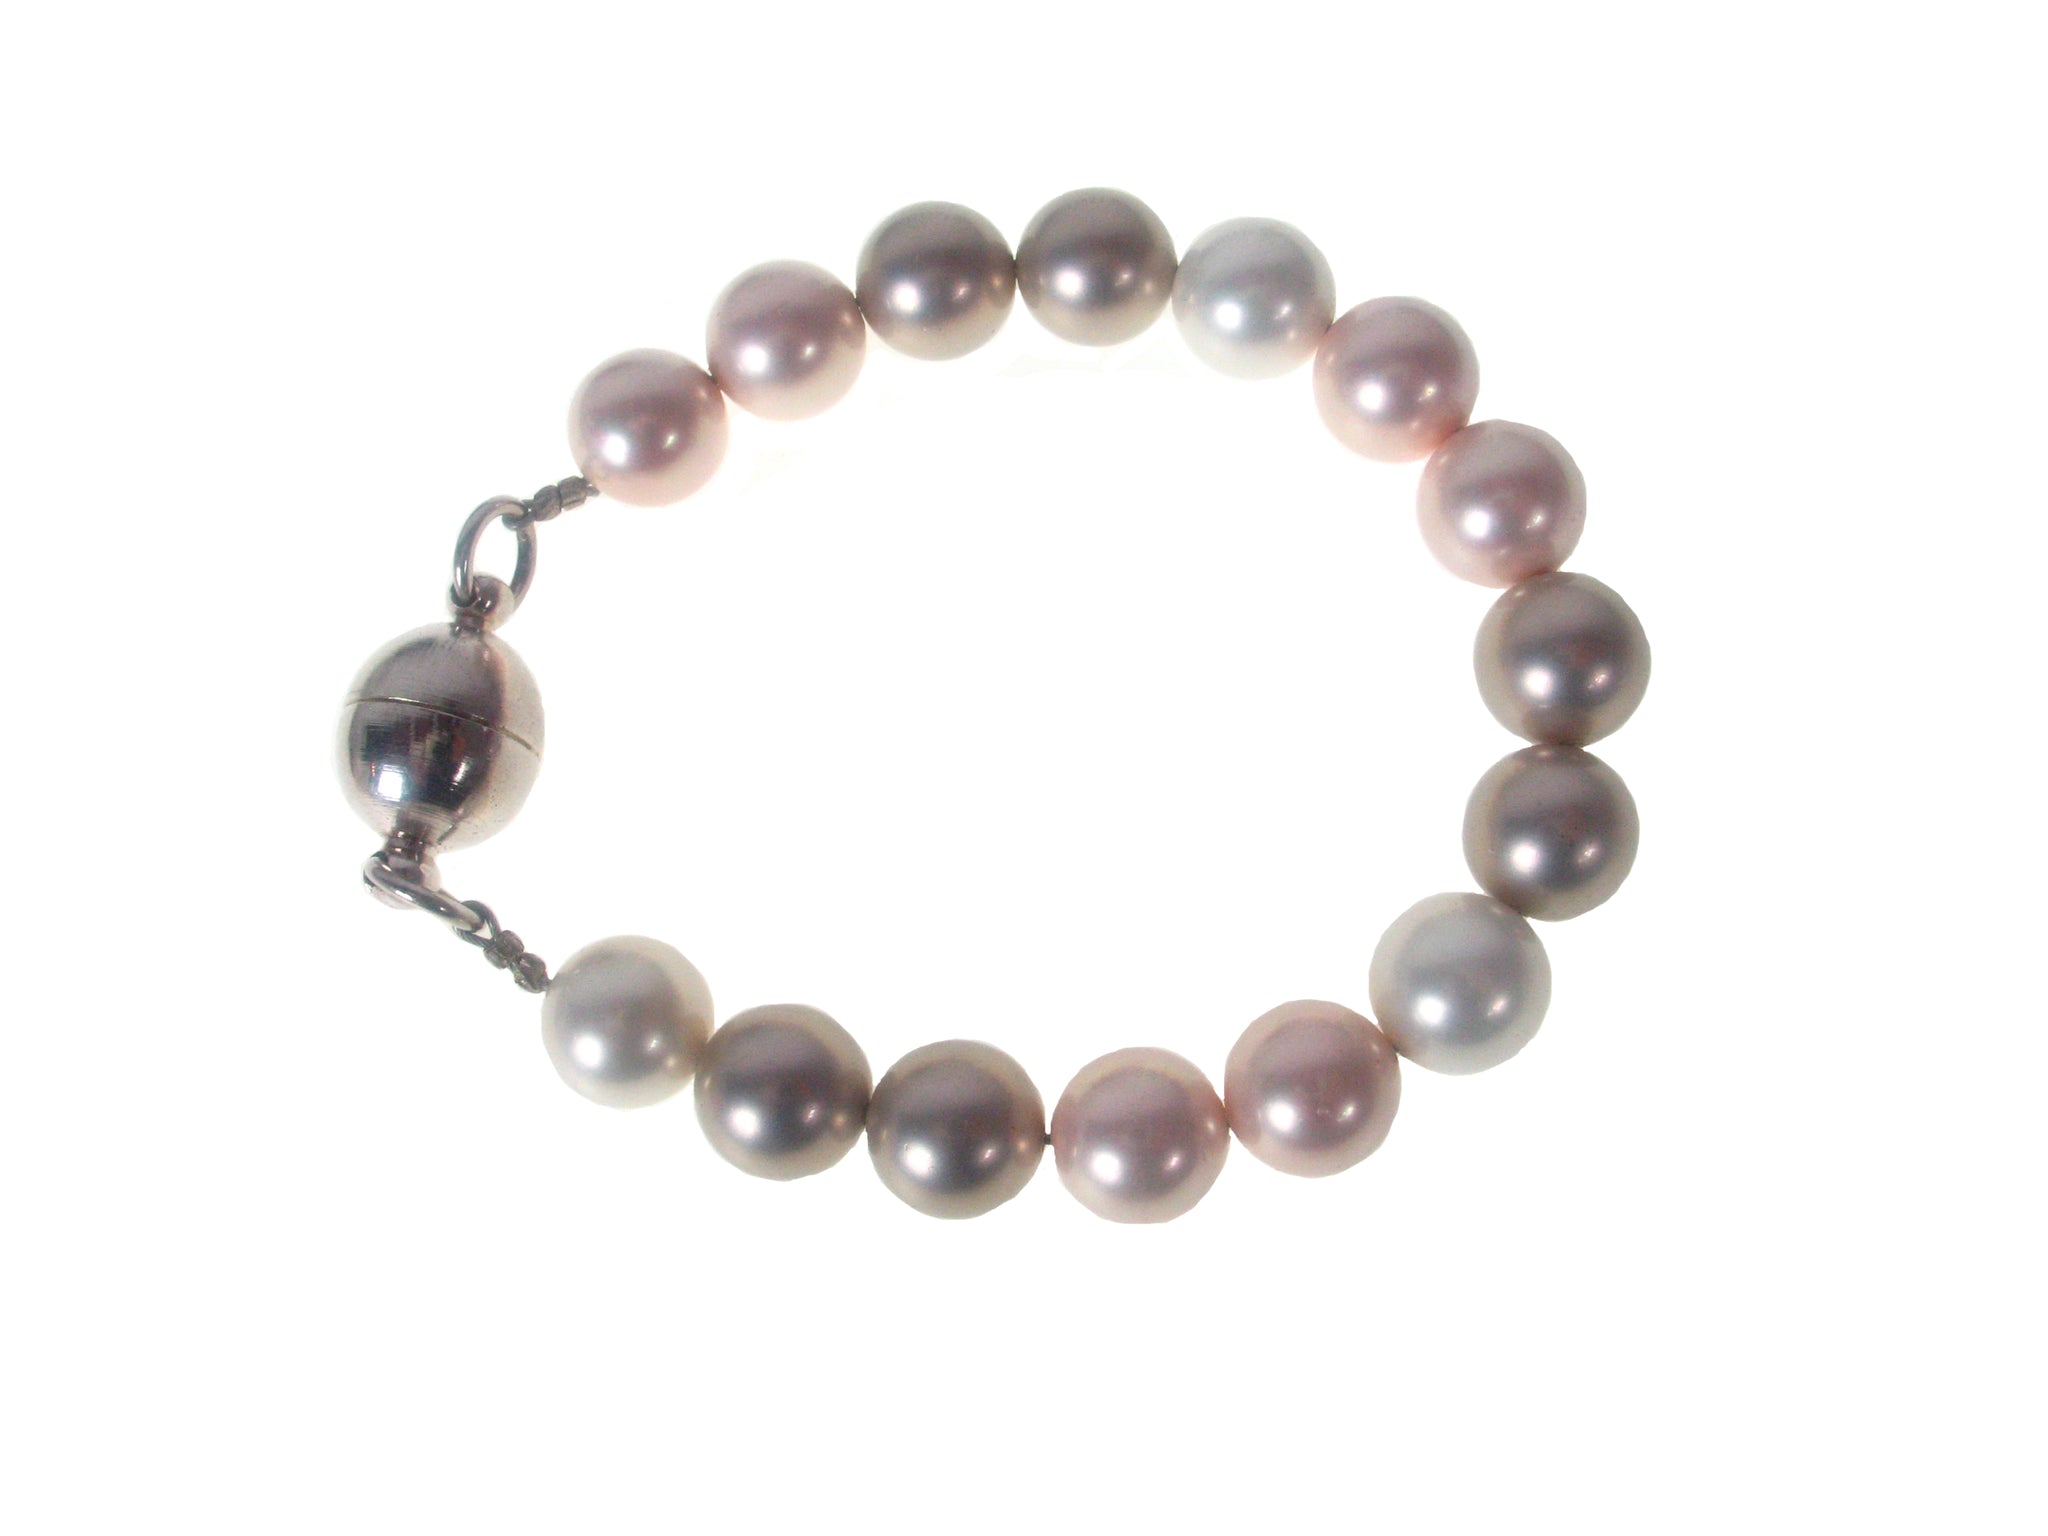 Hicarer Faux Pearl Bracelet 3-Row Pearl Stretch India | Ubuy